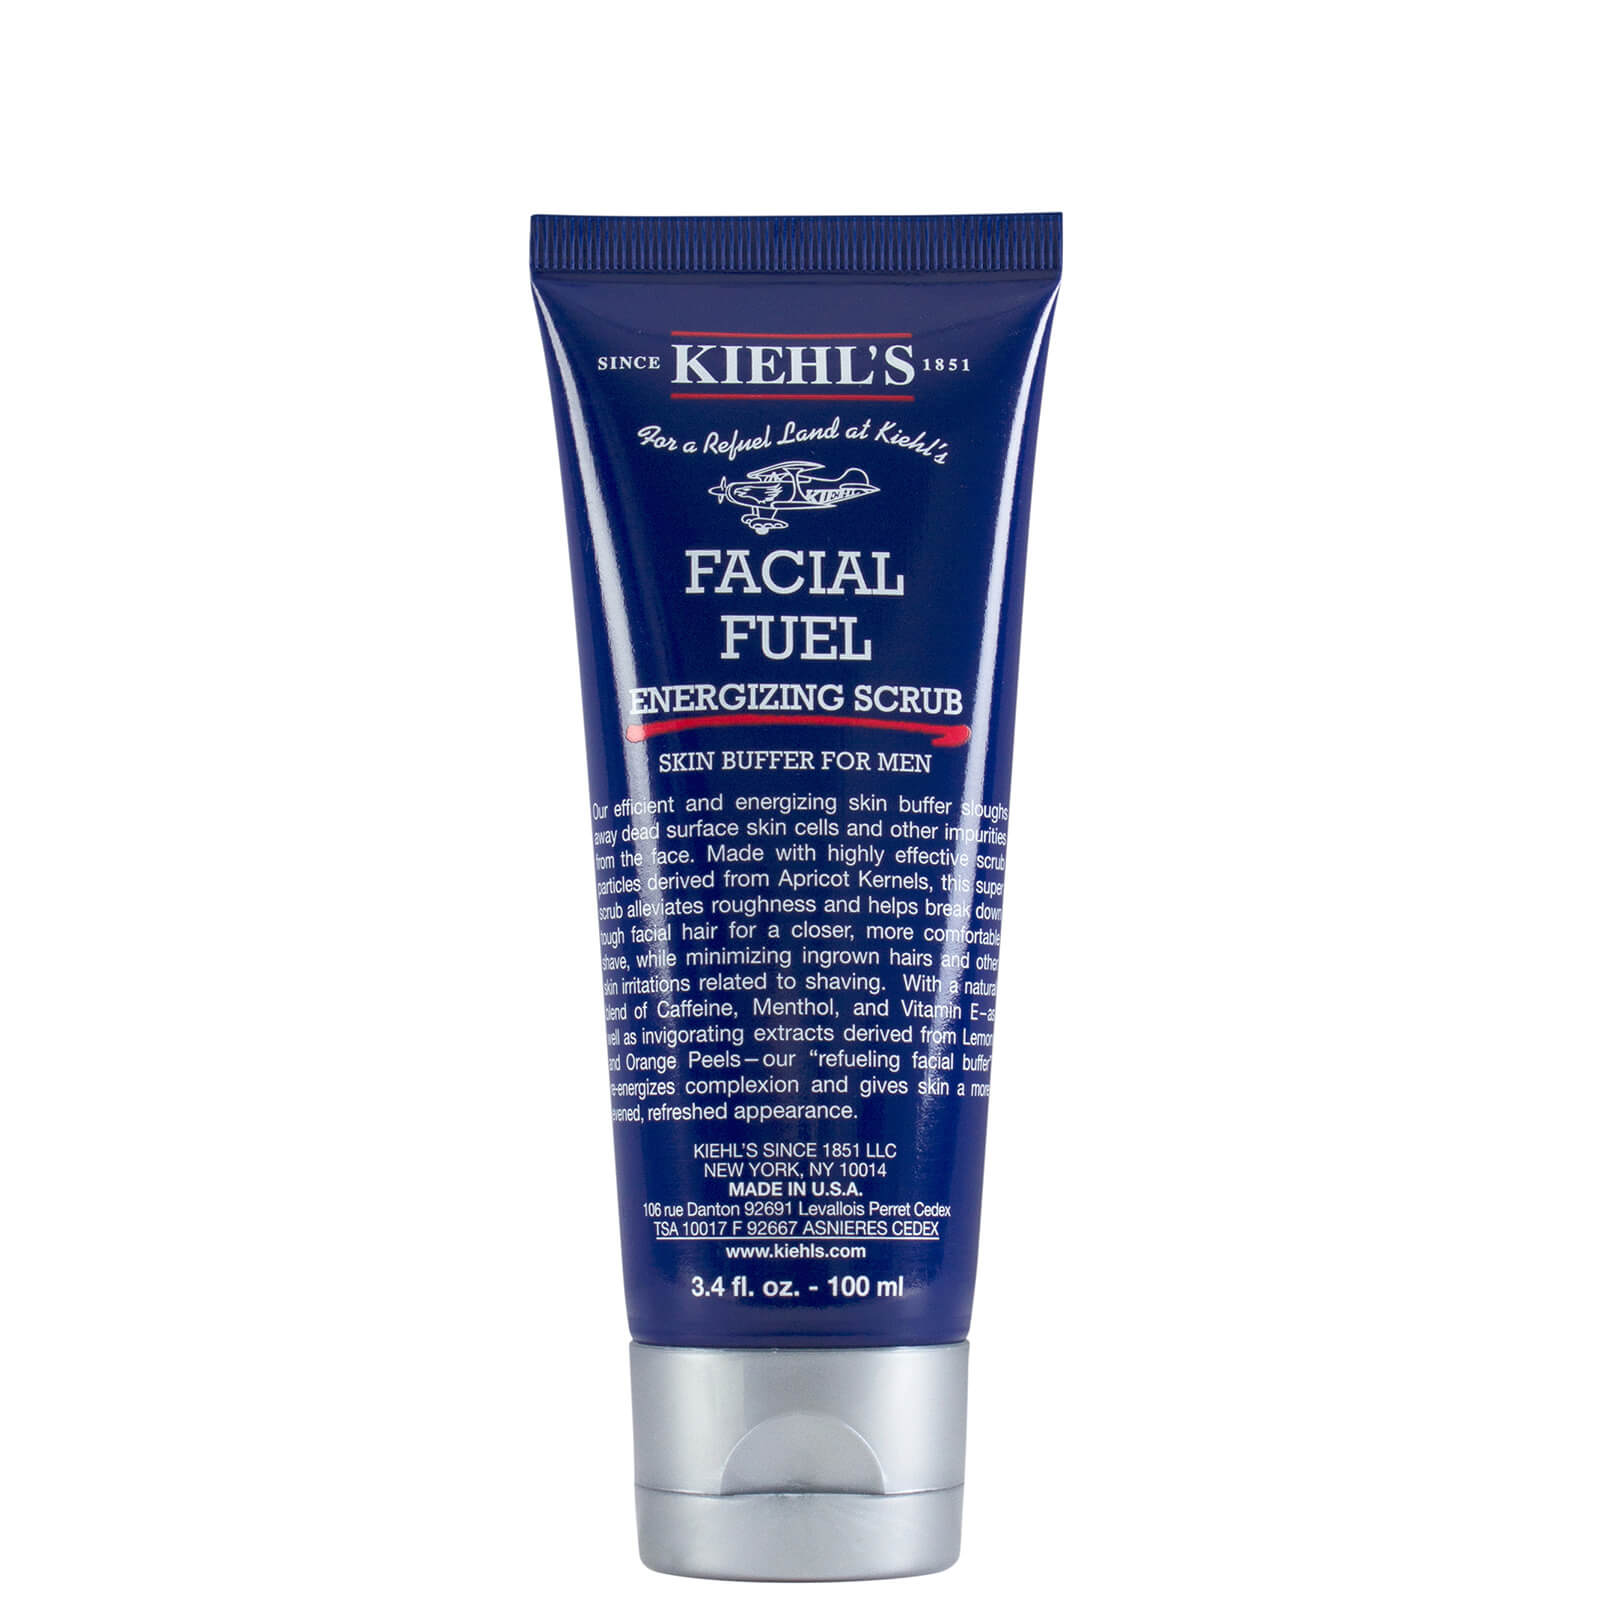 Photos - Facial / Body Cleansing Product Kiehl's Facial Fuel Energising Scrub 100ml S2499400